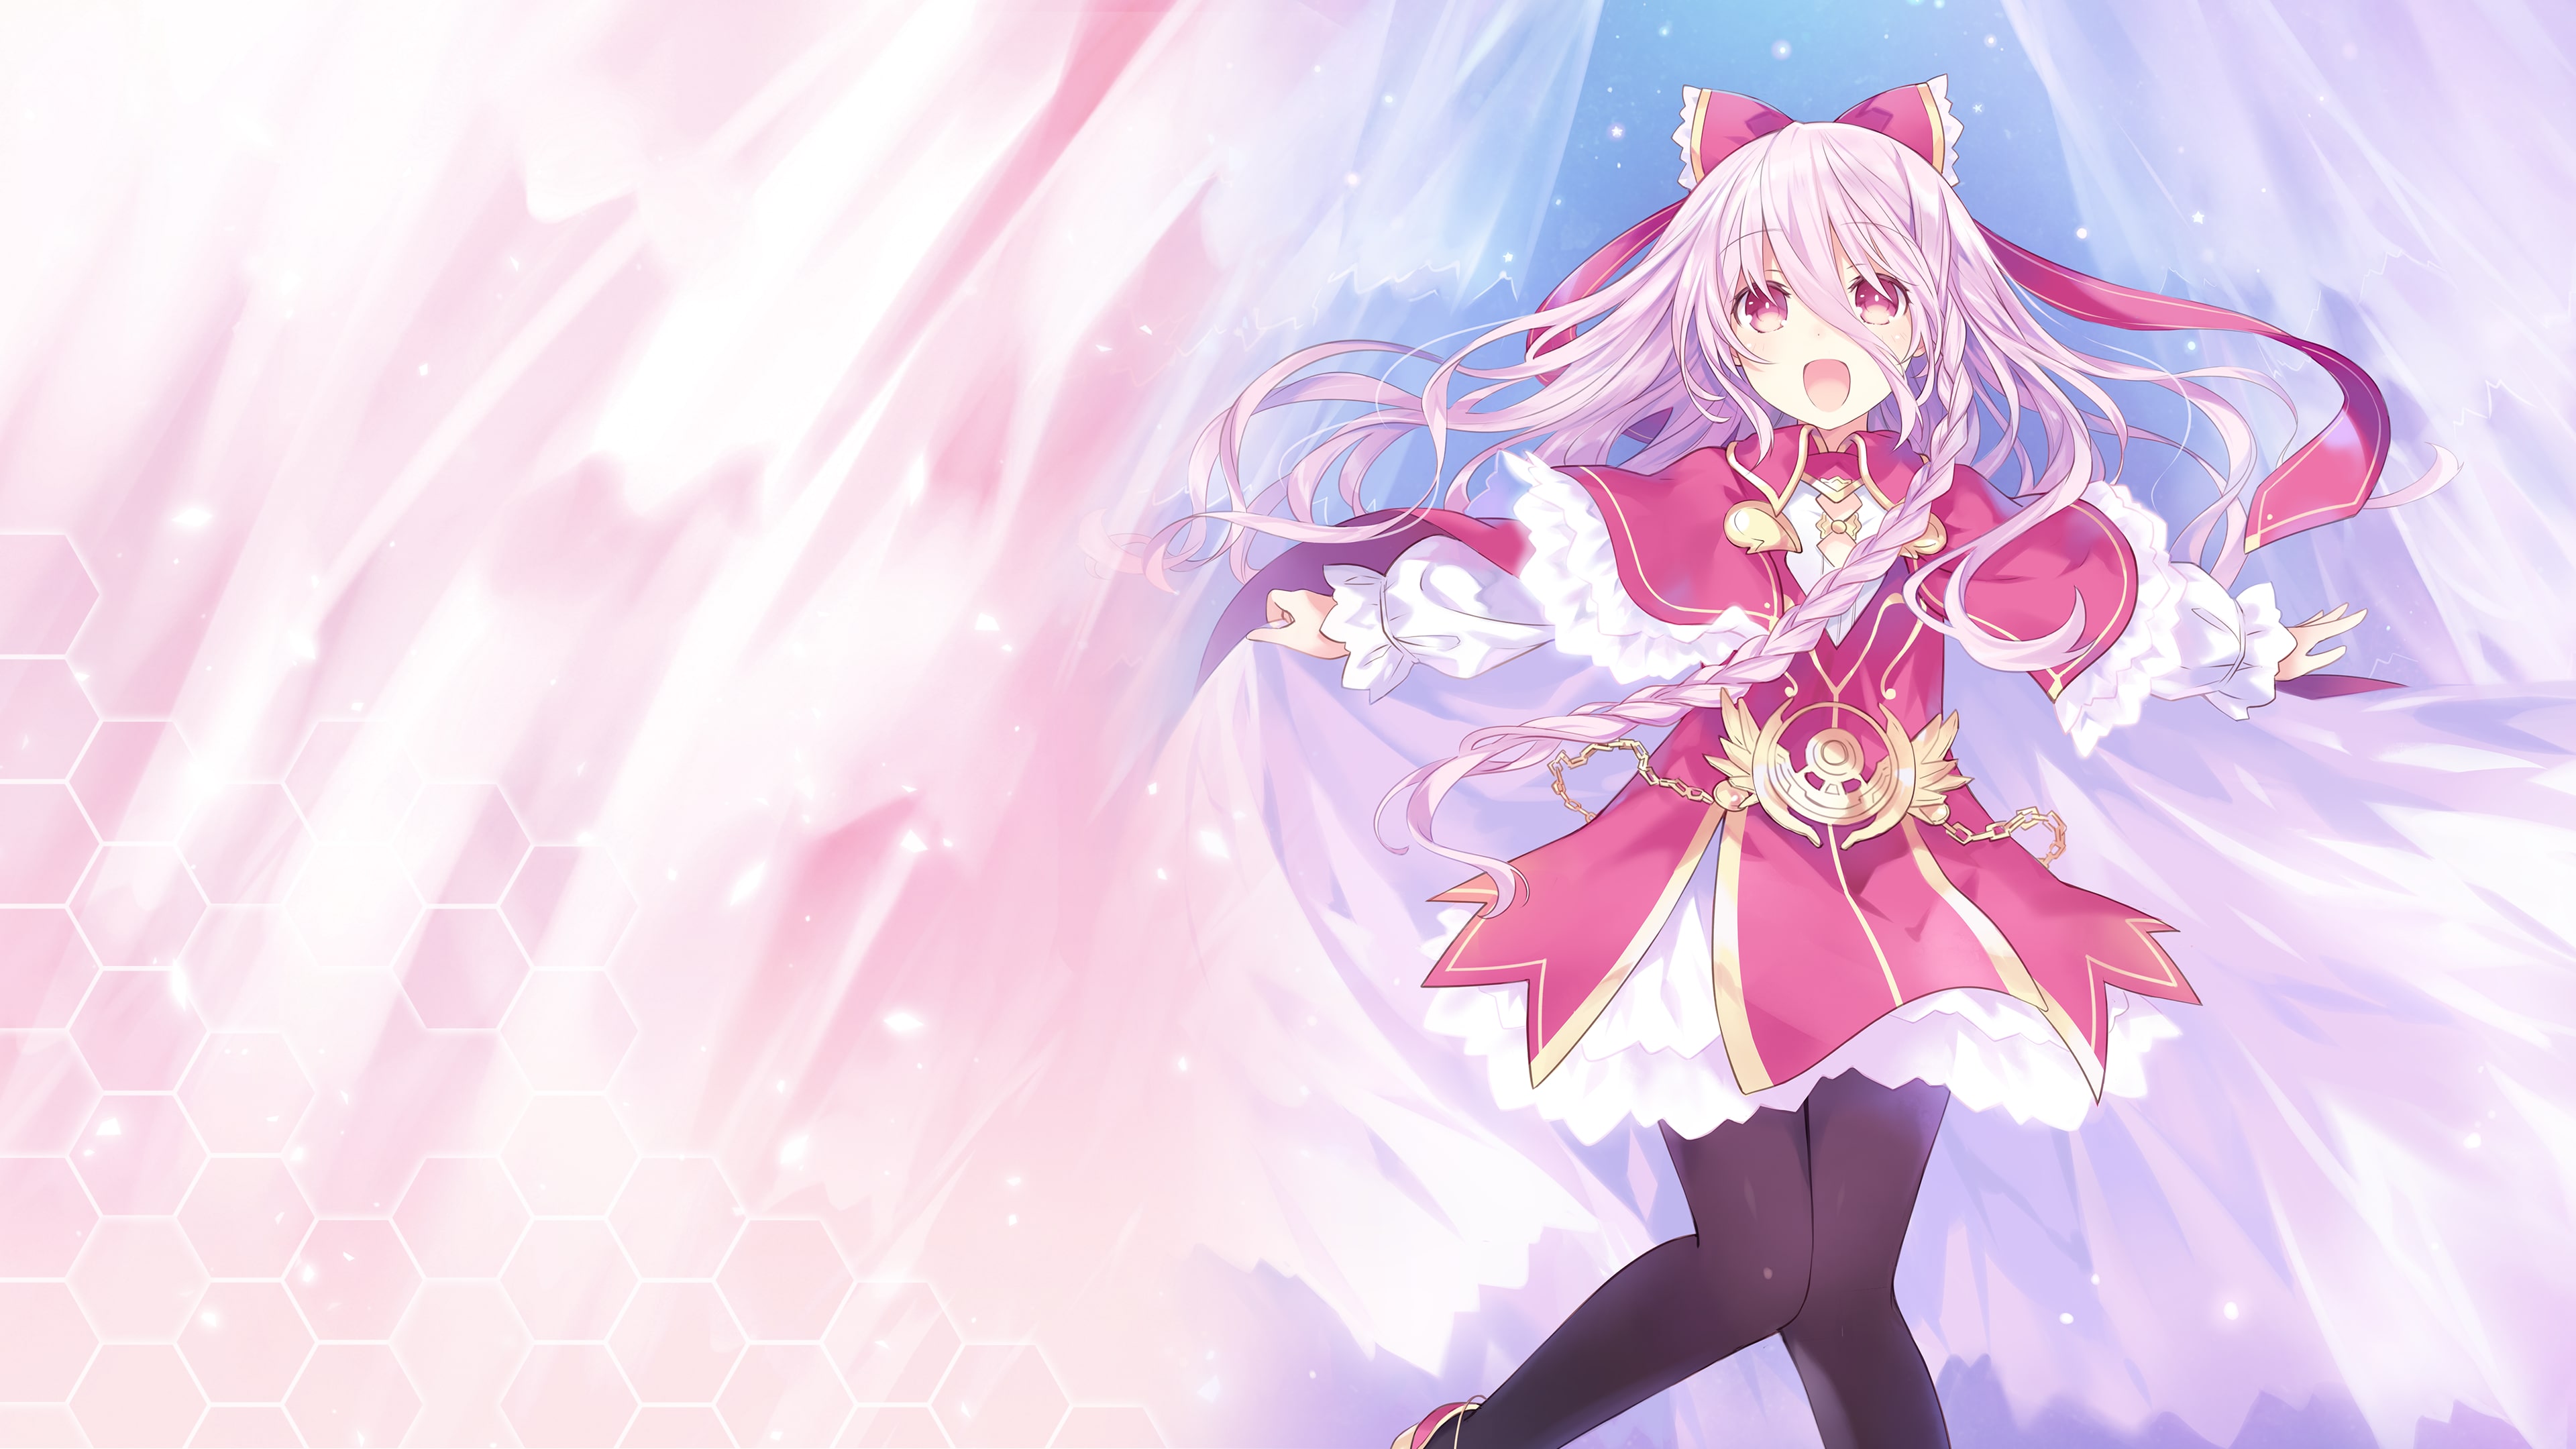 Date A Live Season 4 Delays Release to 2022, Debuts First Trailer